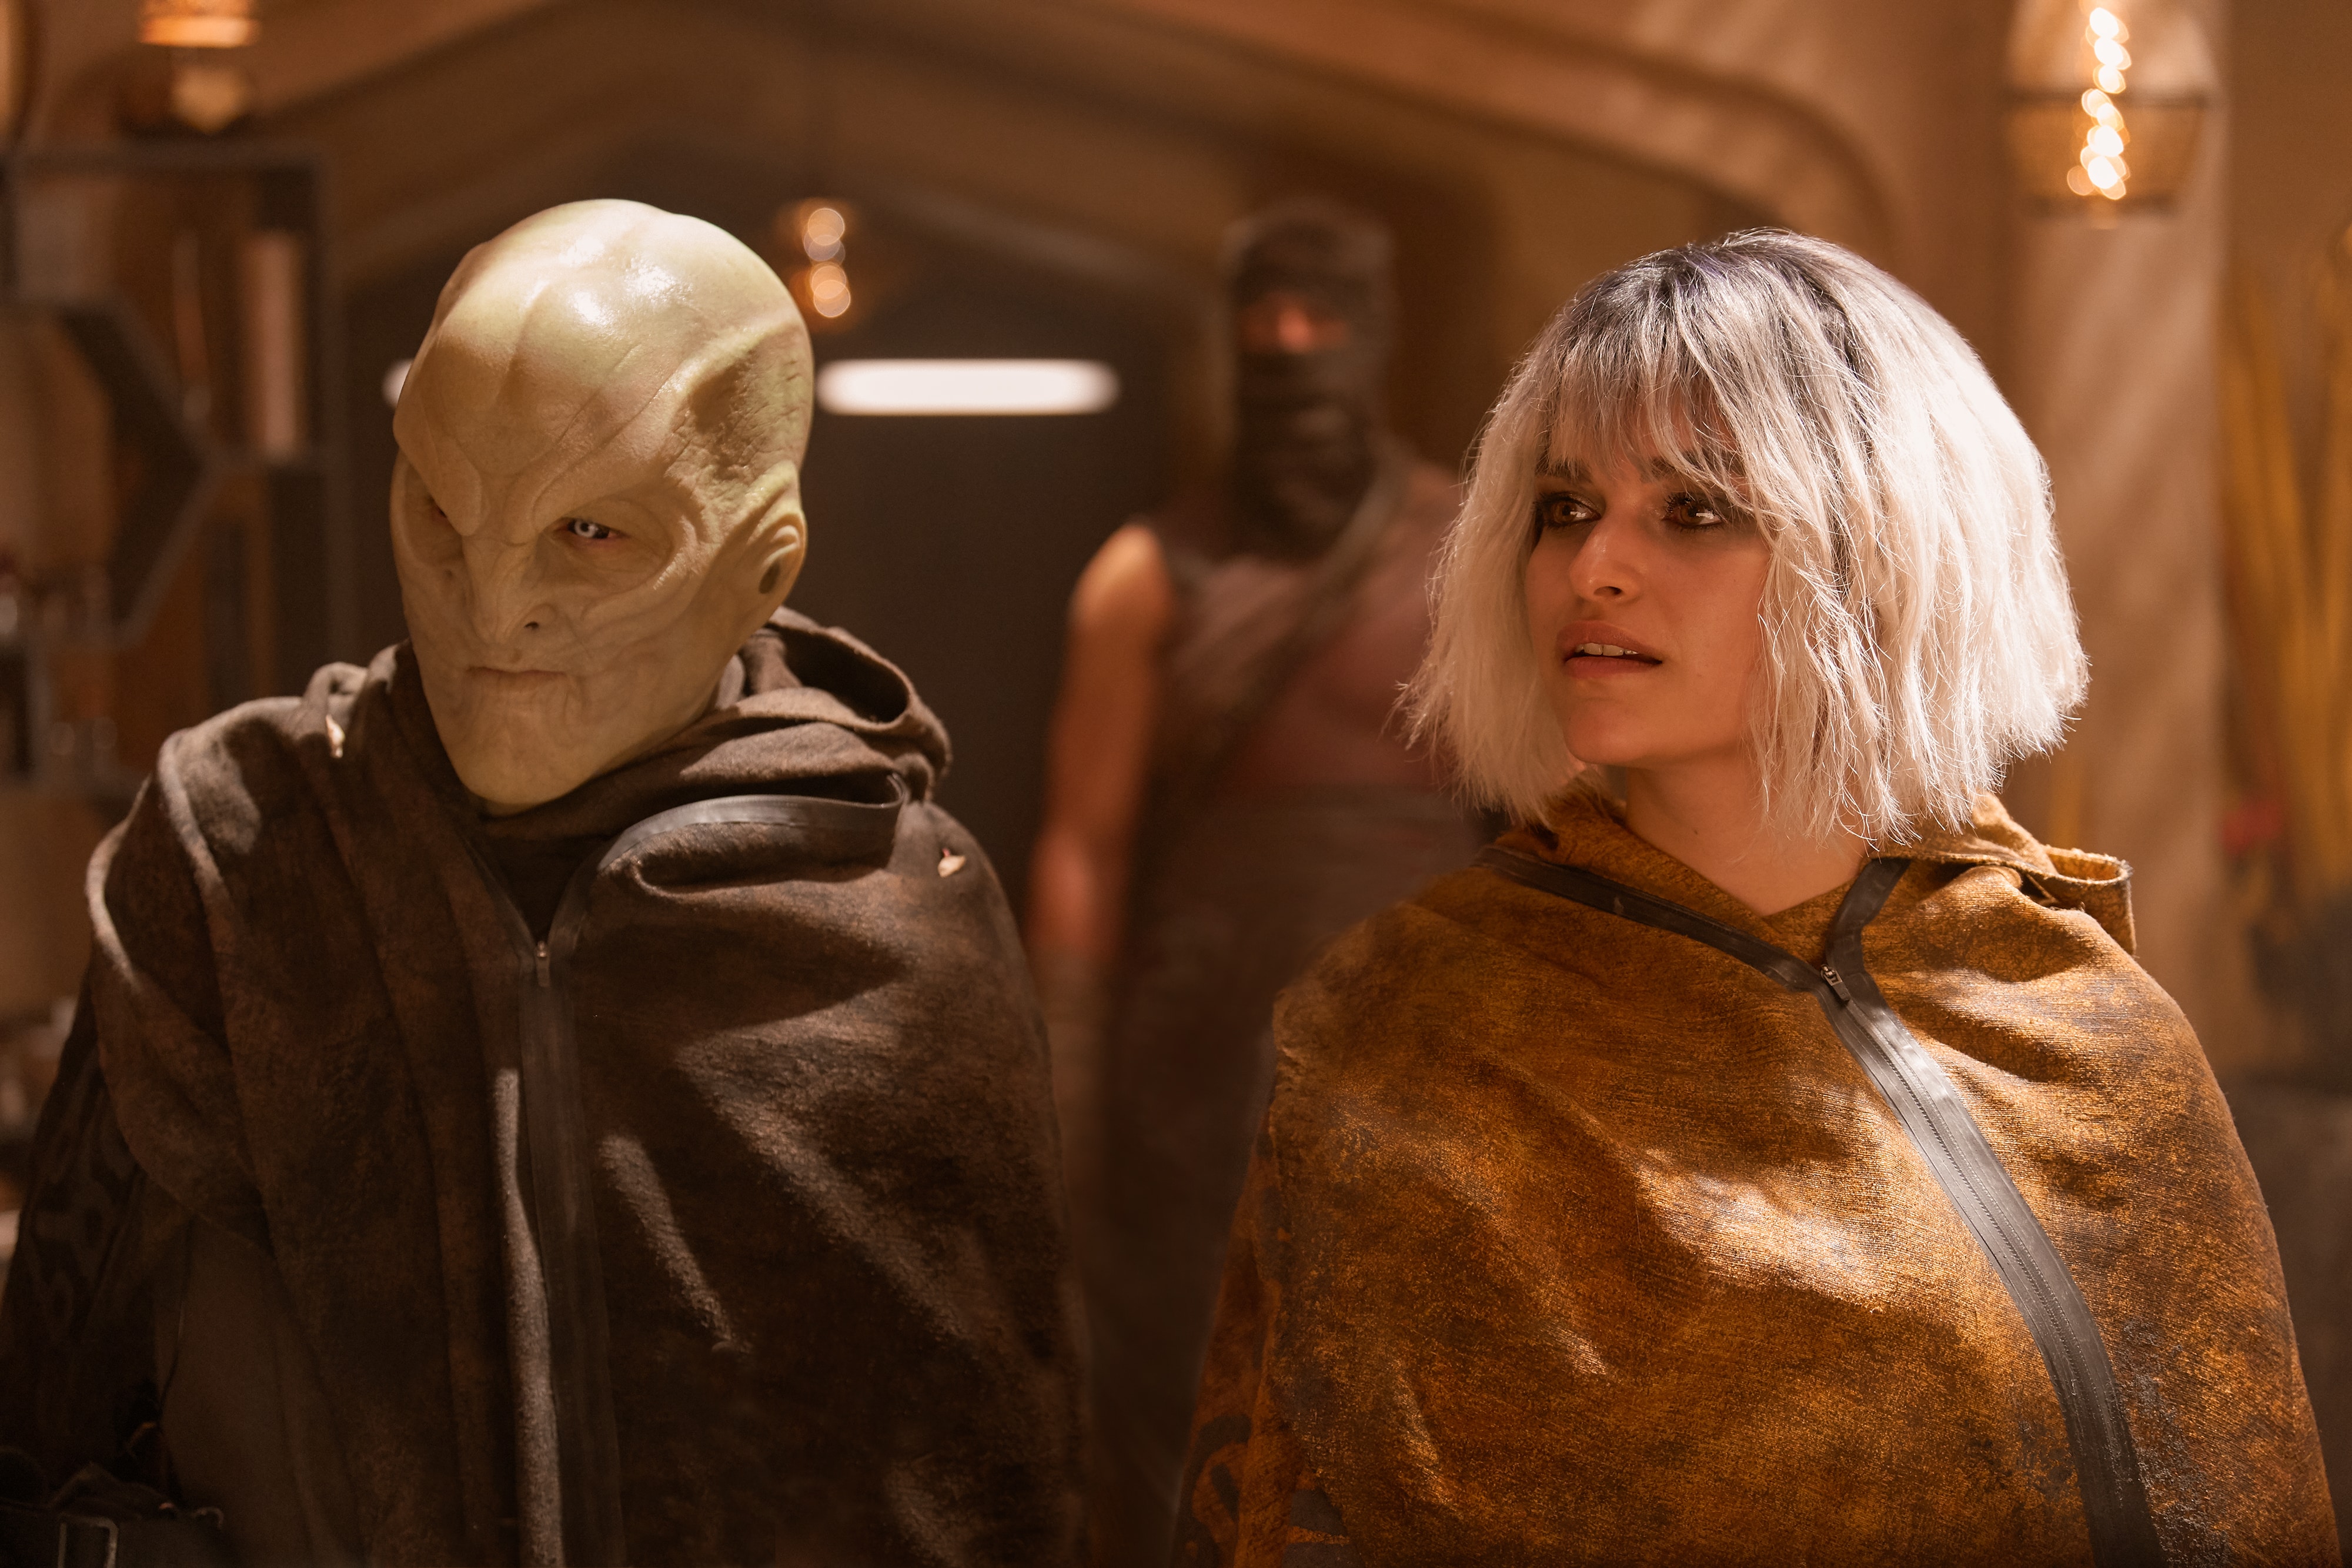 Elias Toufexis as L'ak and Eve Harlow as Moll in the Paramount+ original series STAR TREK: DISCOVERY.